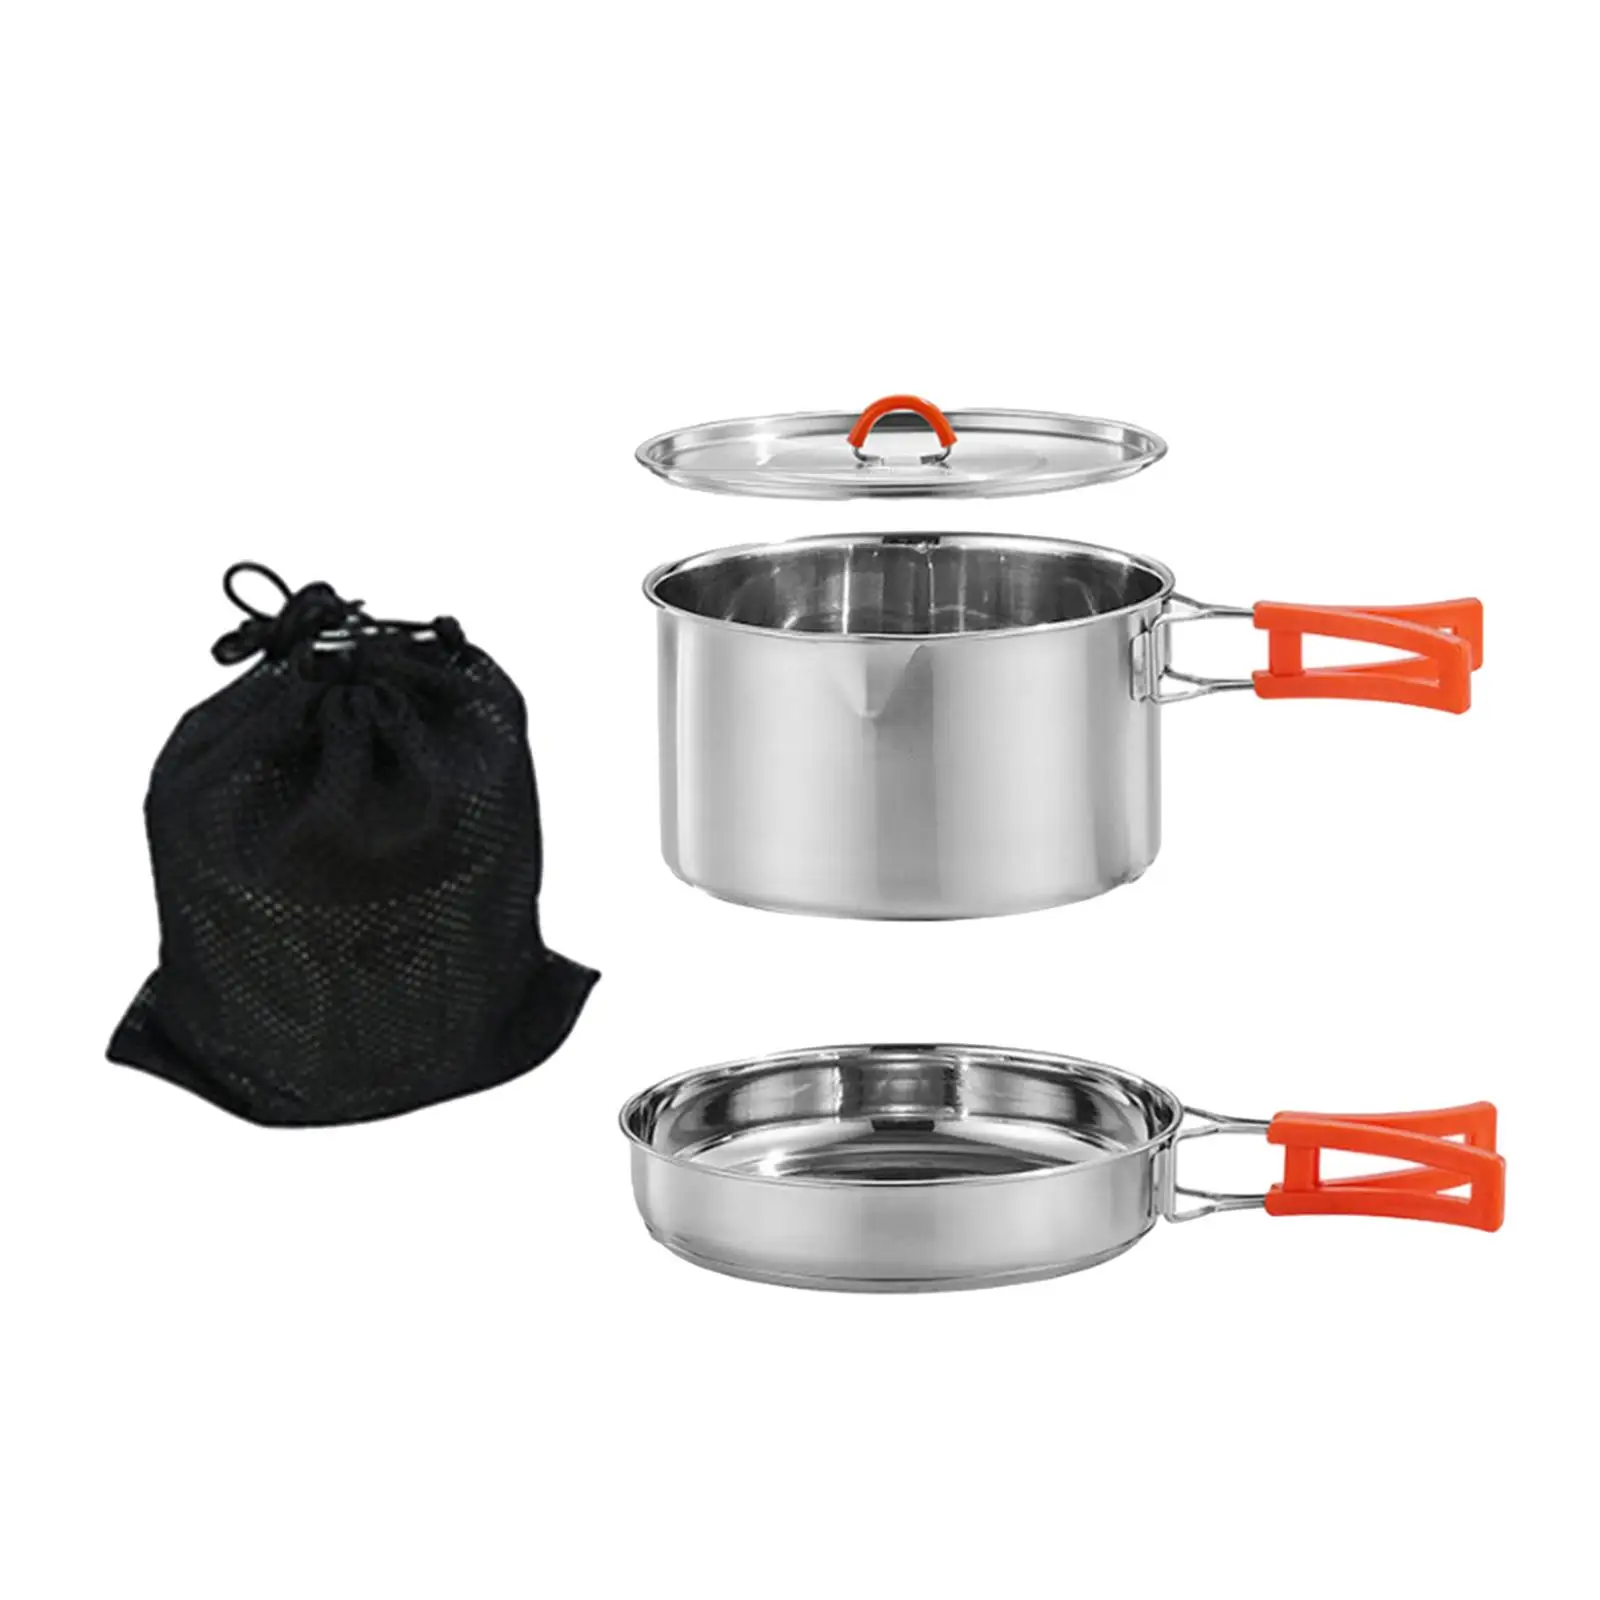 Camping Cookware Set with Folding Handles Portable Included Mesh Carry Bag for Hiking Picnic Backpacking Outdoor Equipment